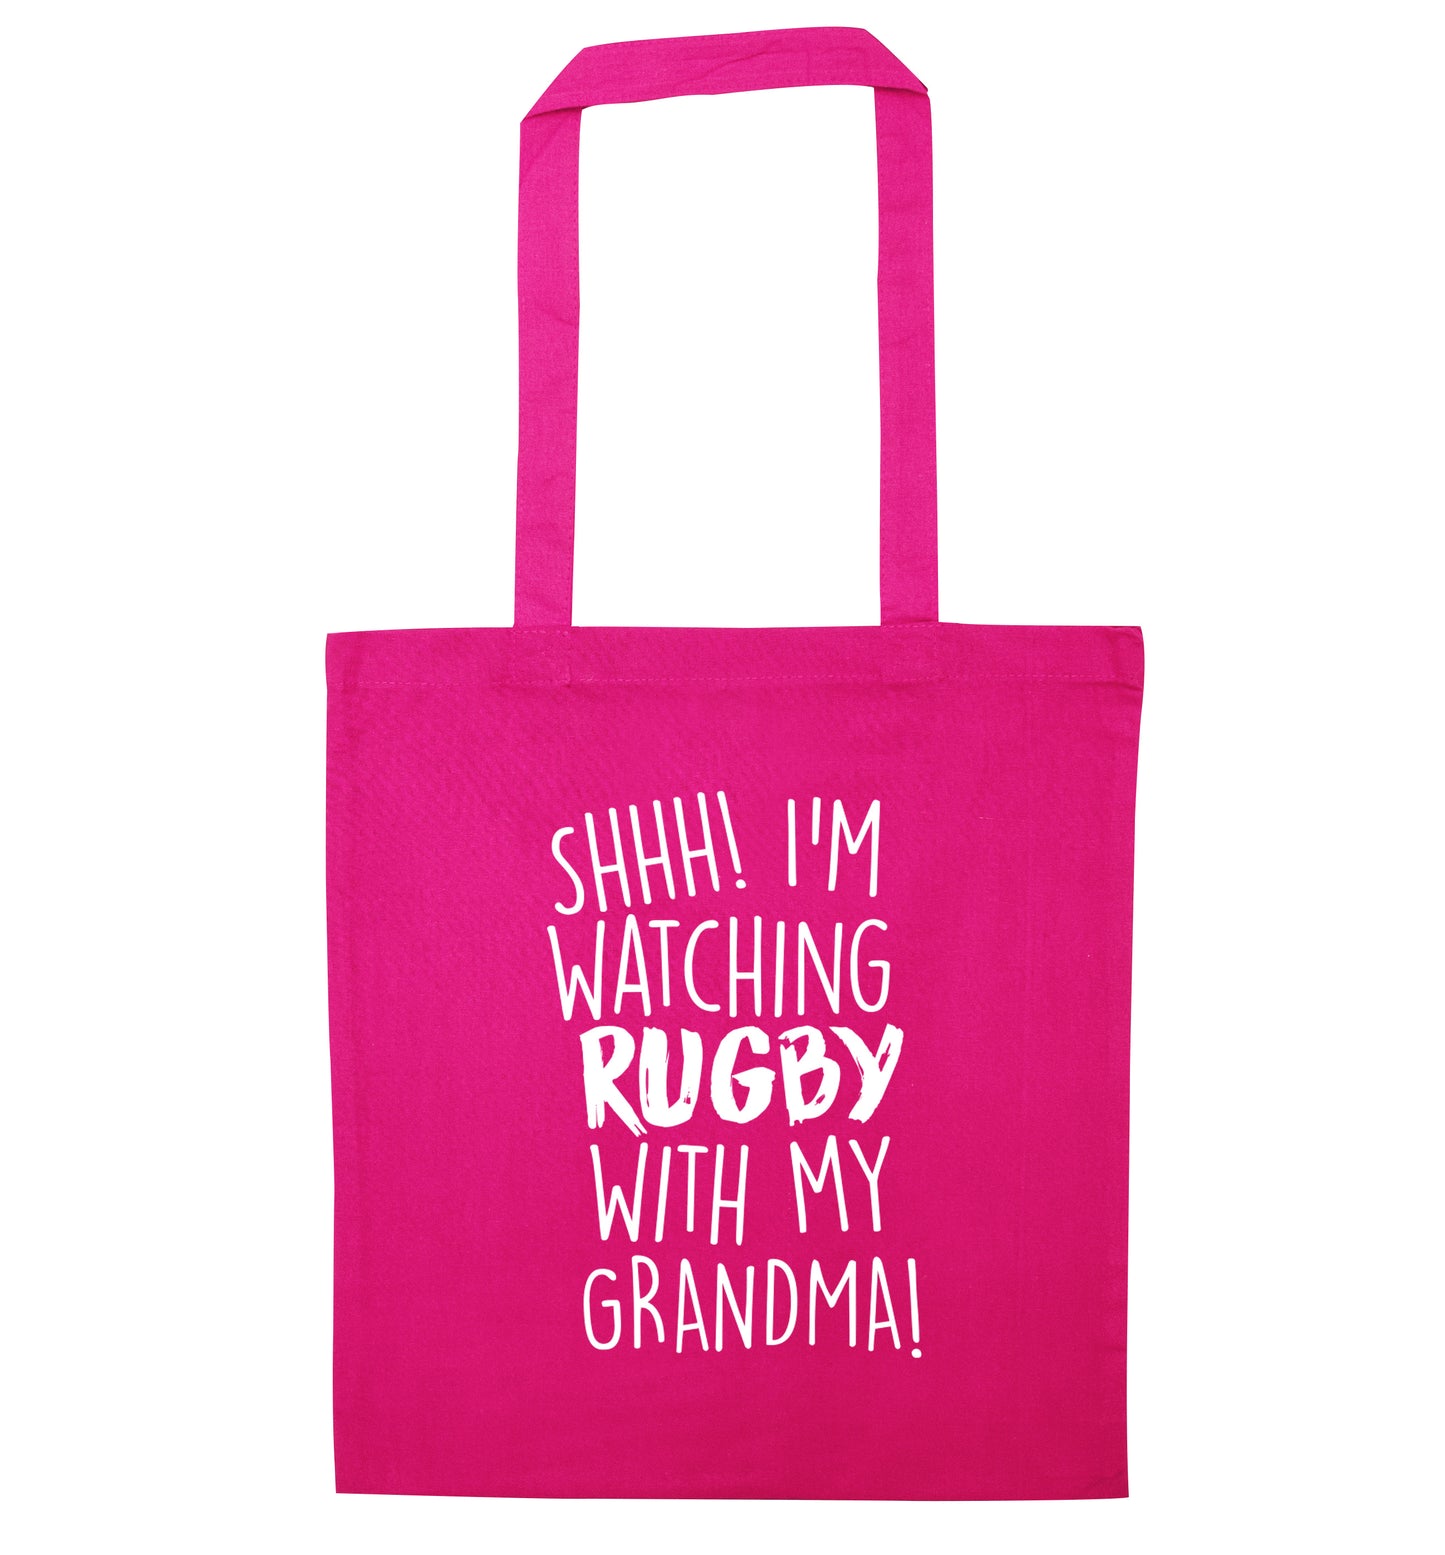 Shh I'm watching rugby with my grandma pink tote bag